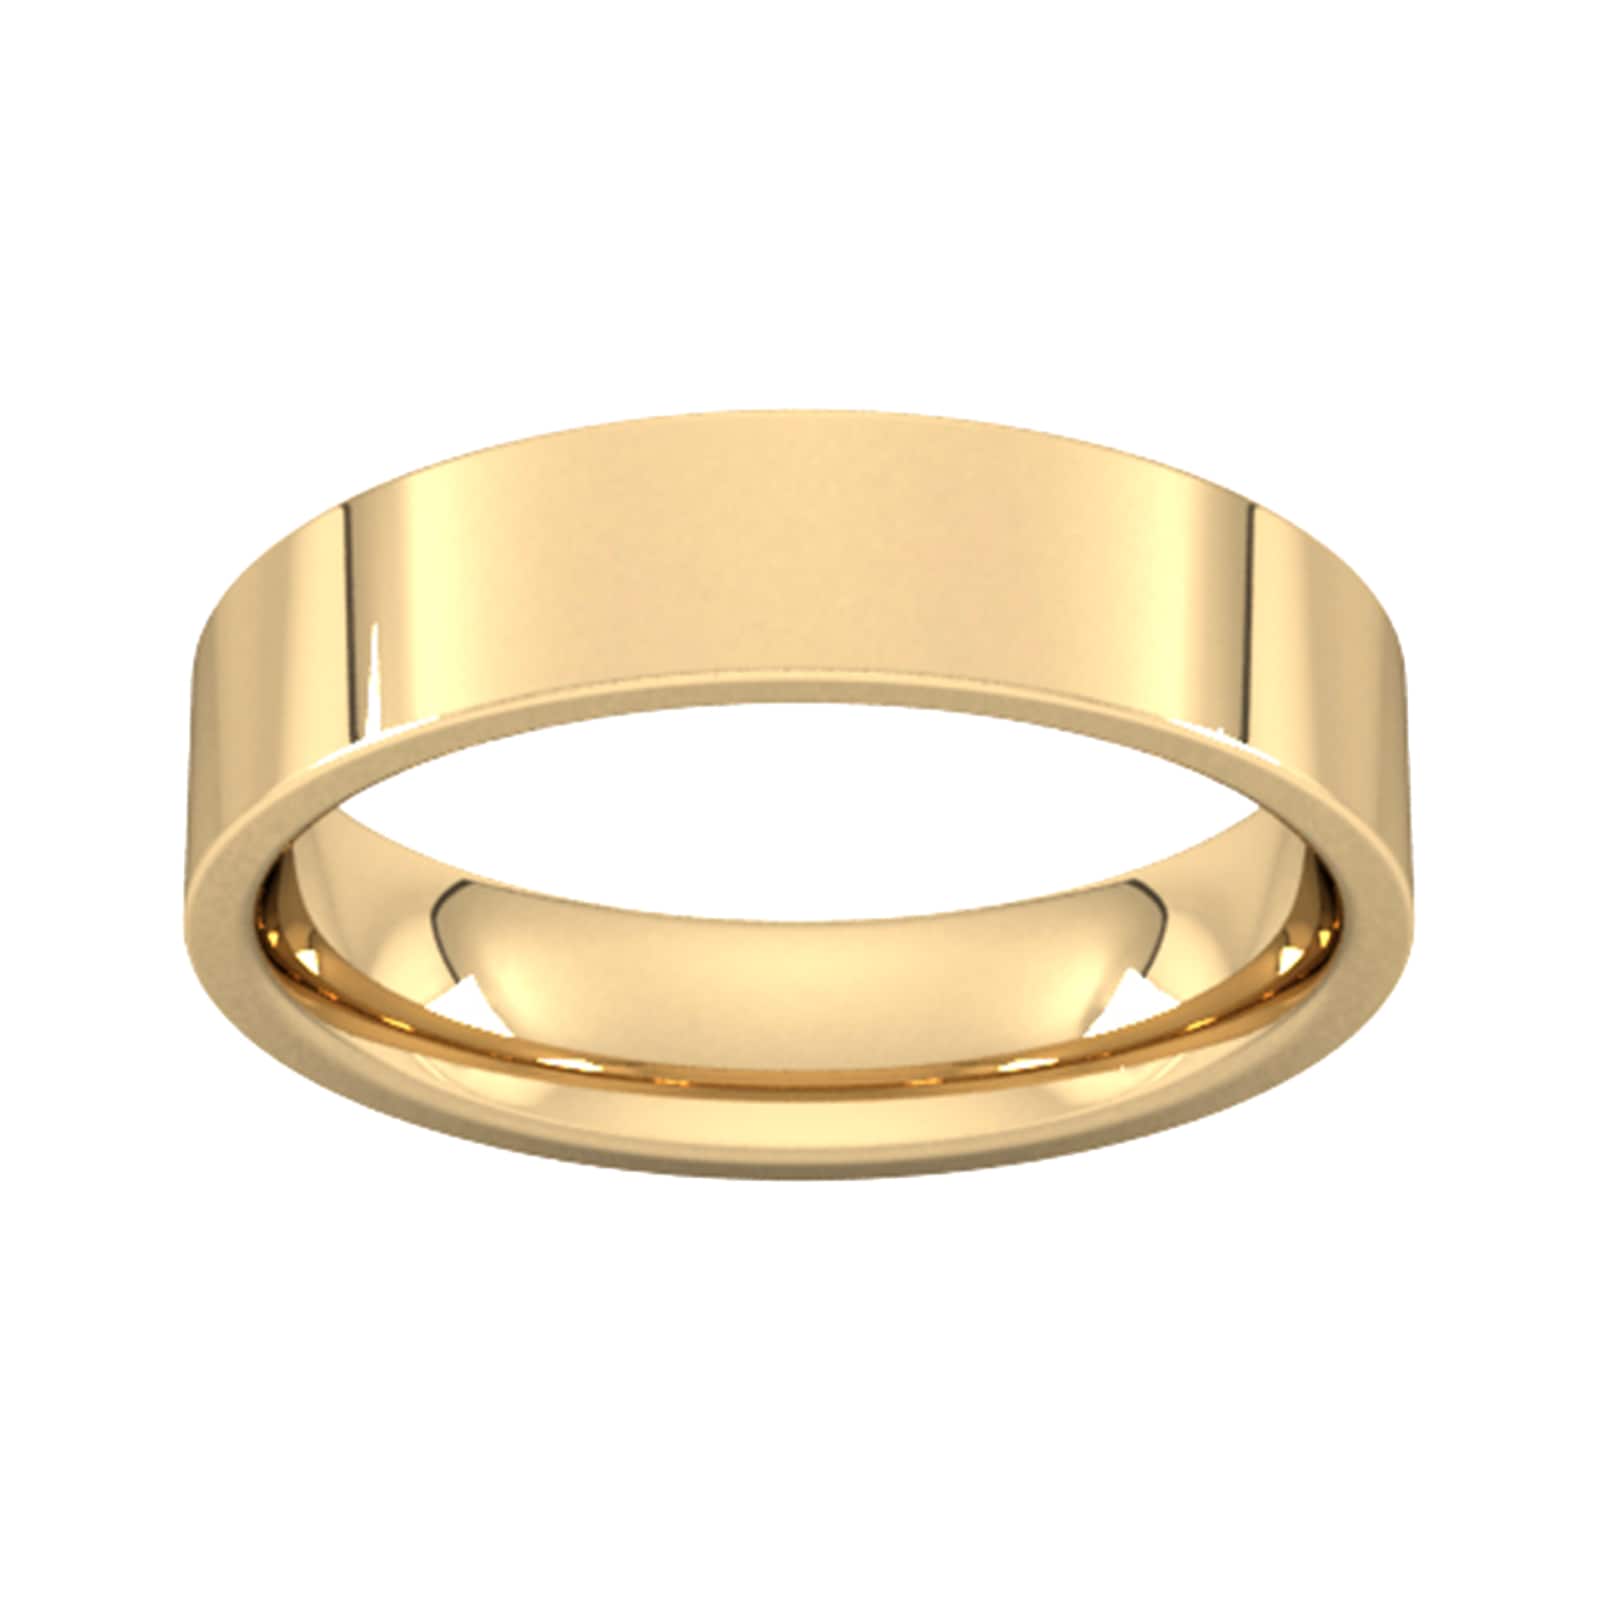 5mm Flat Court Heavy Wedding Ring In 9 Carat Yellow Gold - Ring Size M